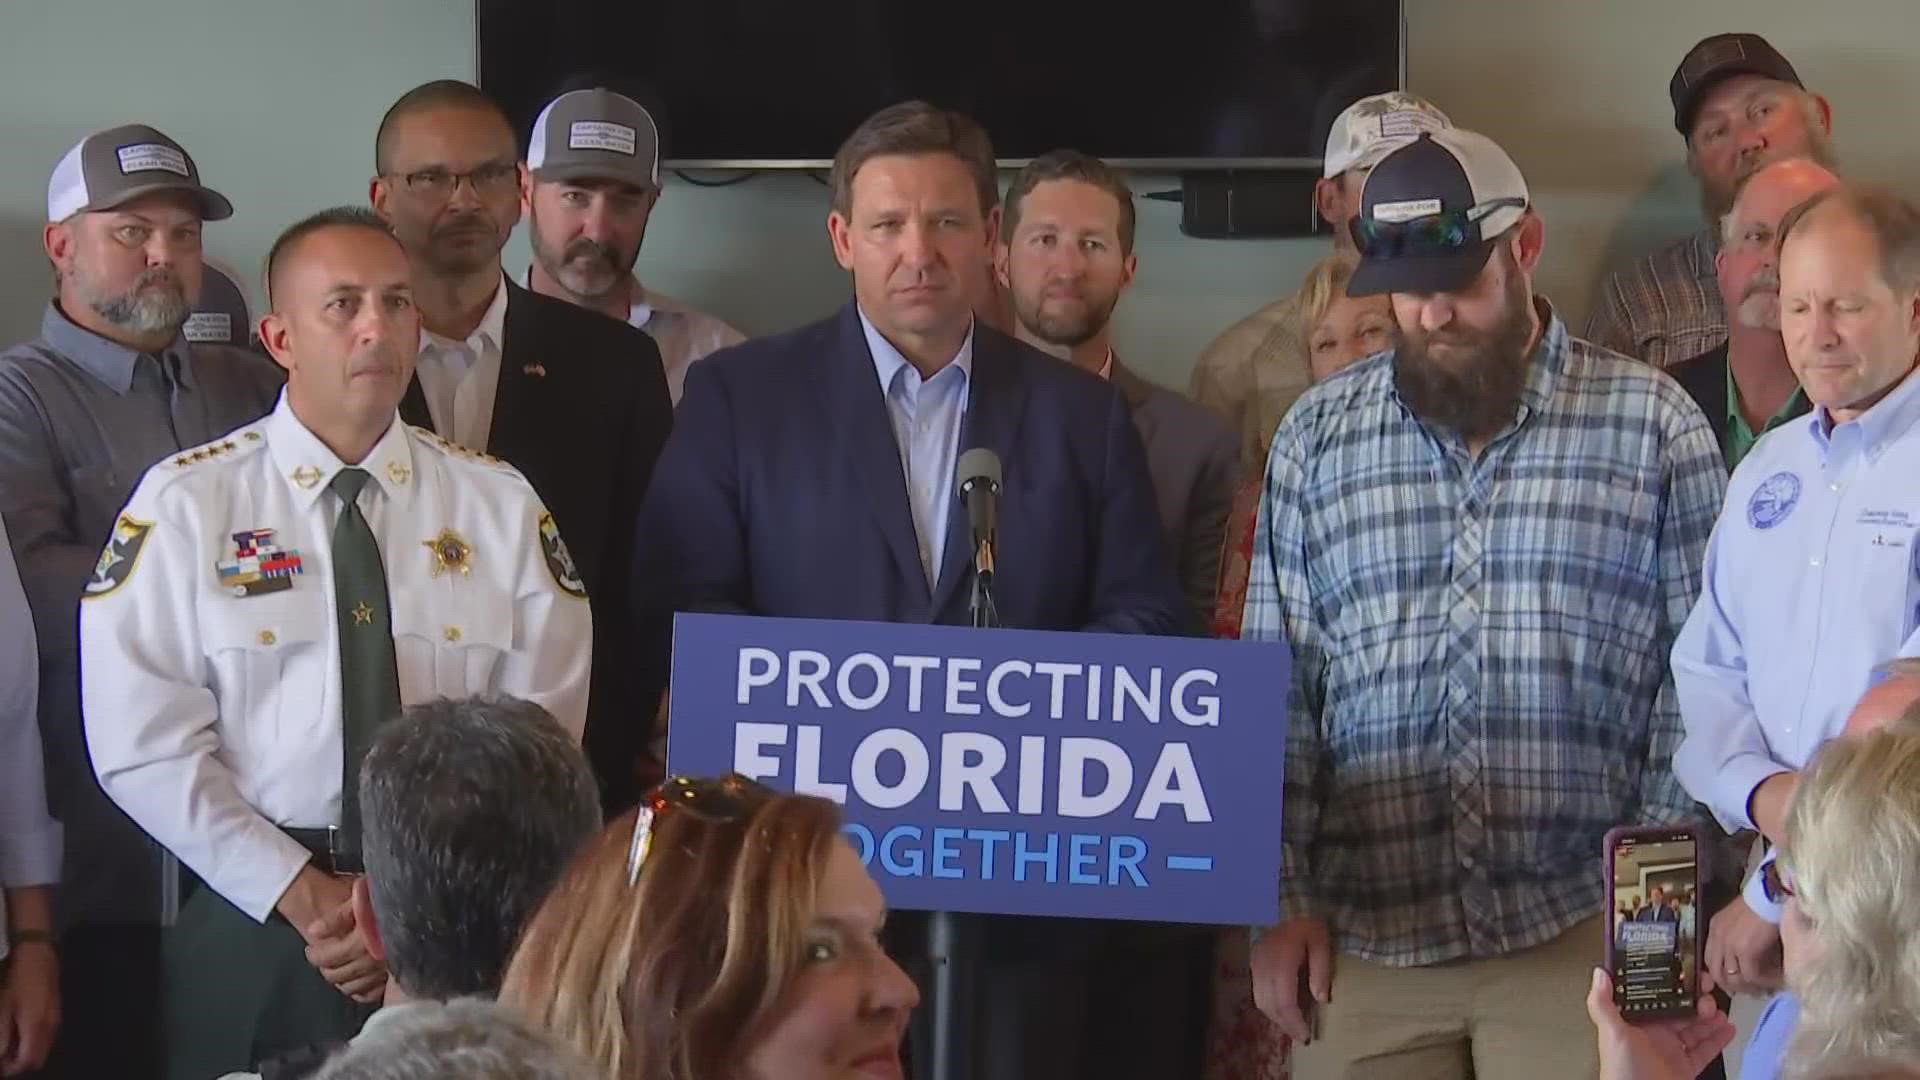 DeSantis said he asked his staff to look at the state's child protective statutes following recent controversy in Dallas where children participated in a drag show.